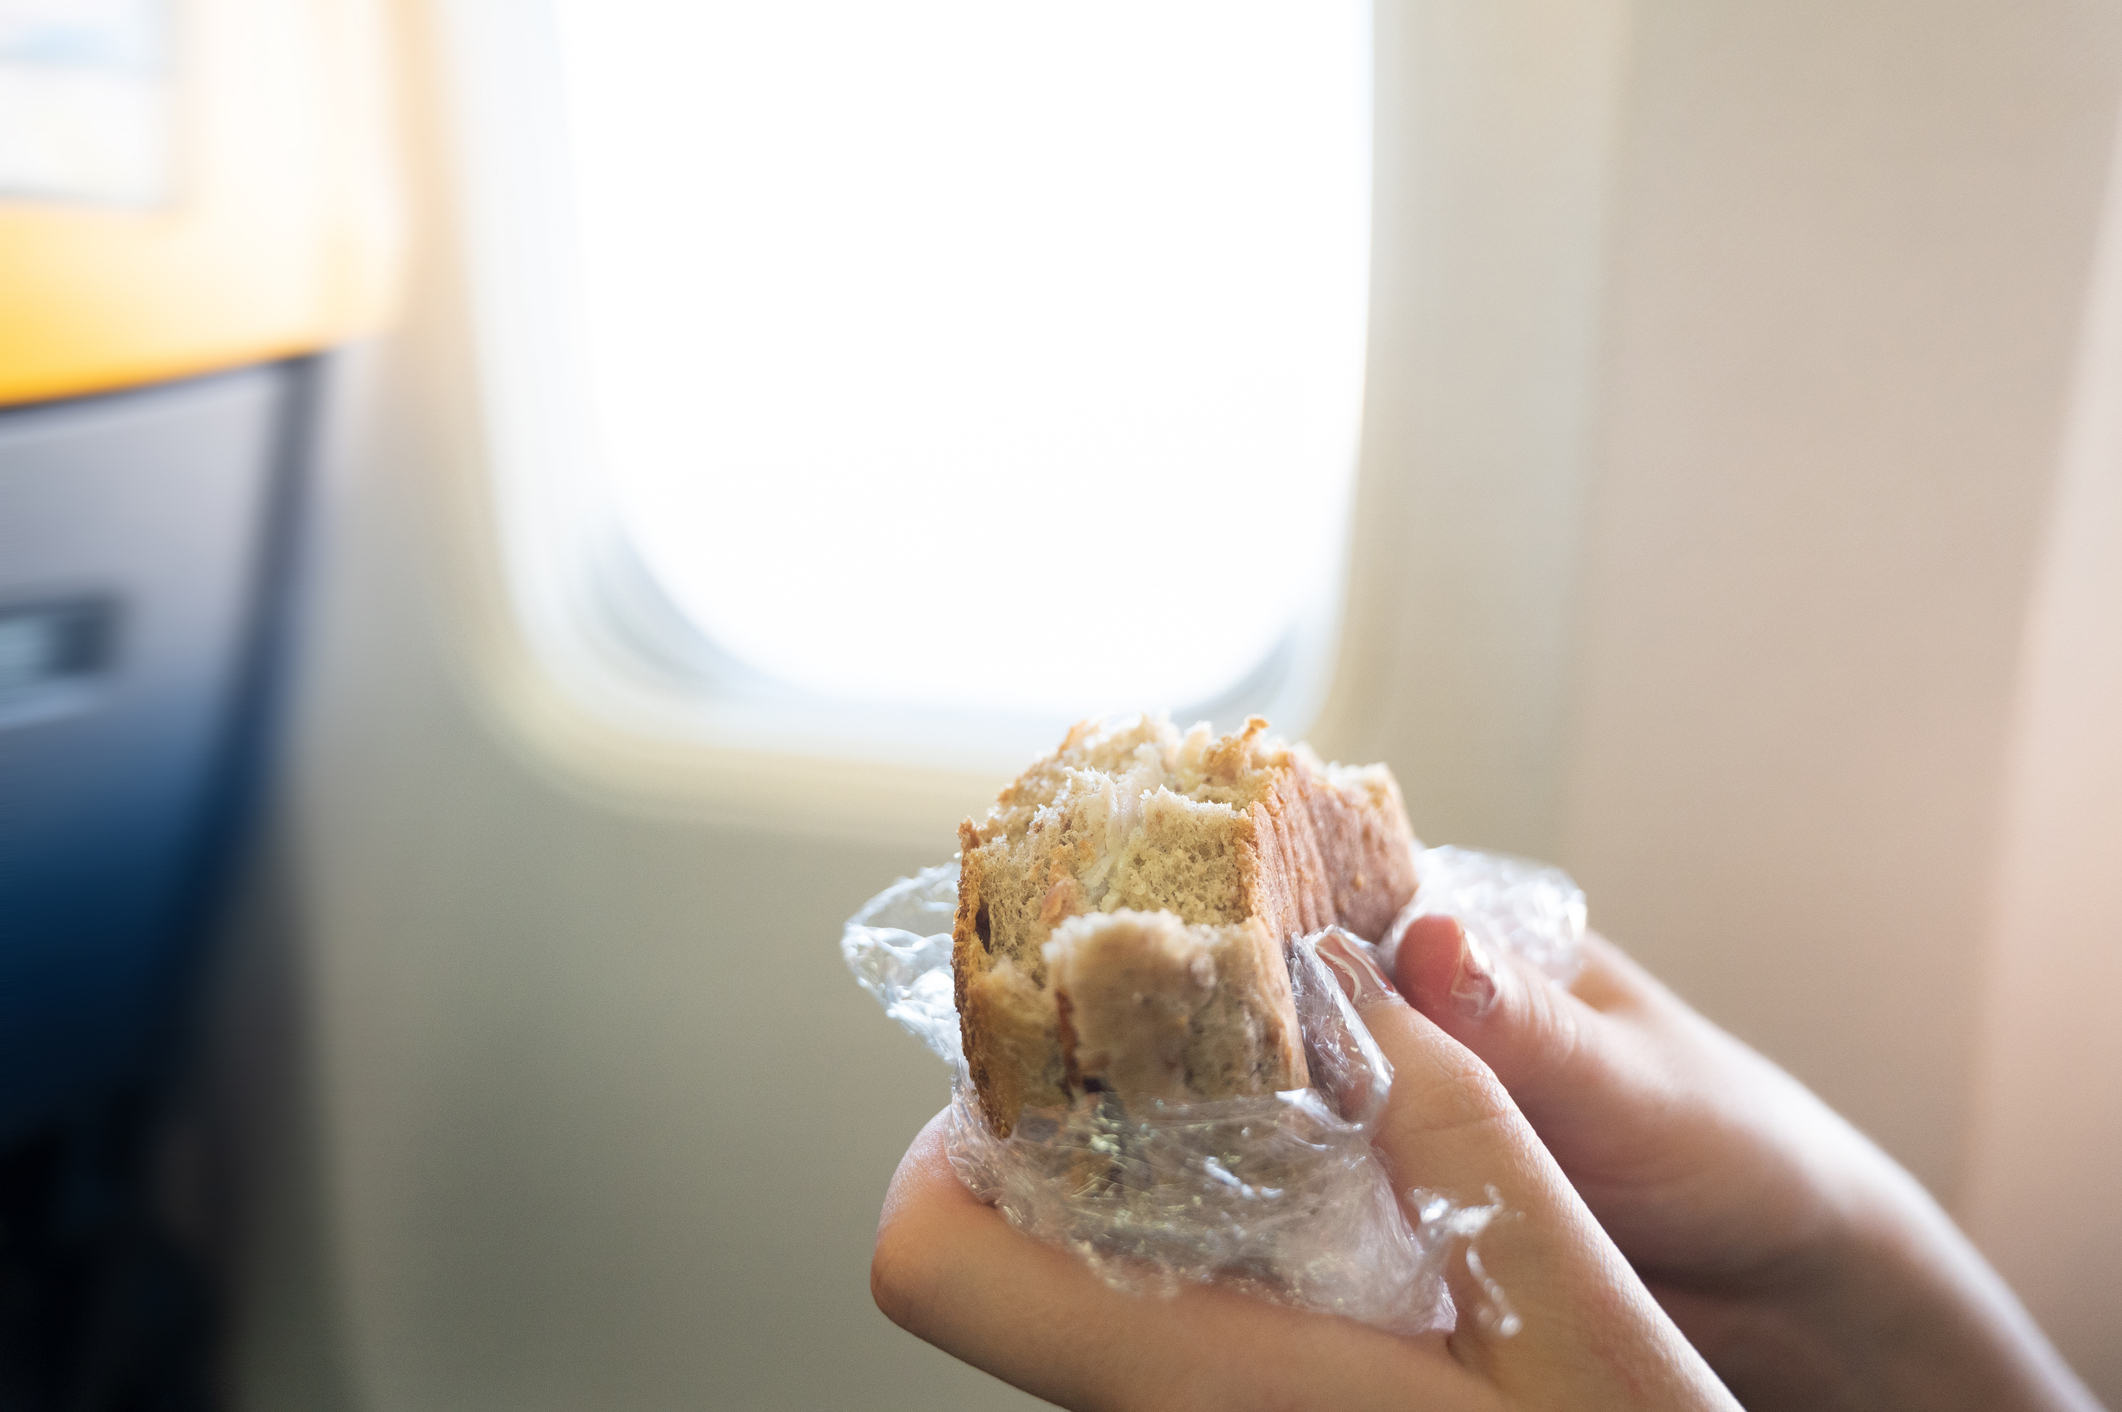 Person holding a sandwich with airplane window in the background, illustrating in-flight meal